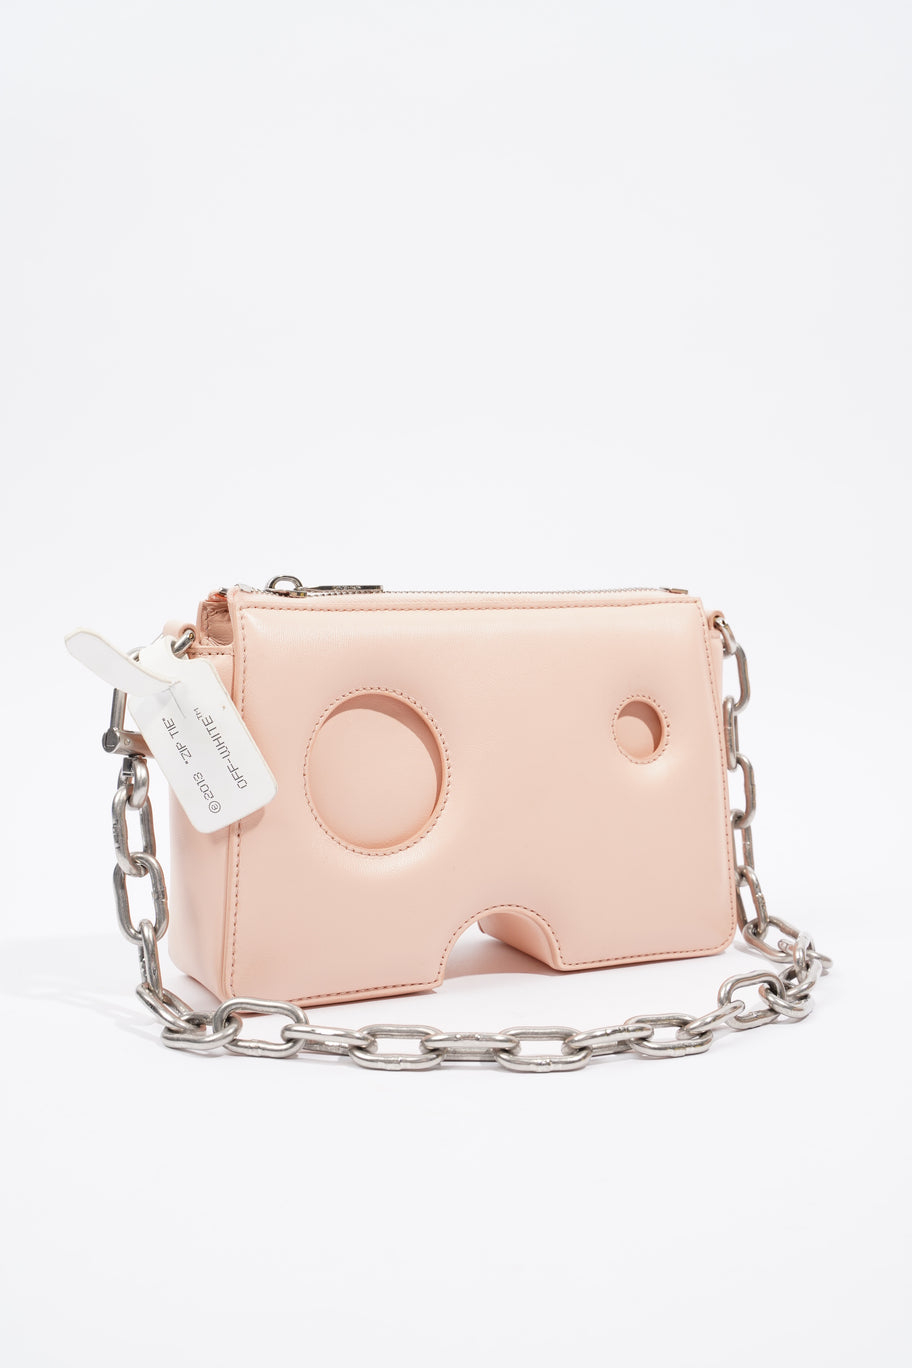 Burrow Zipped Pouch 20 Baby Pink Leather Image 10